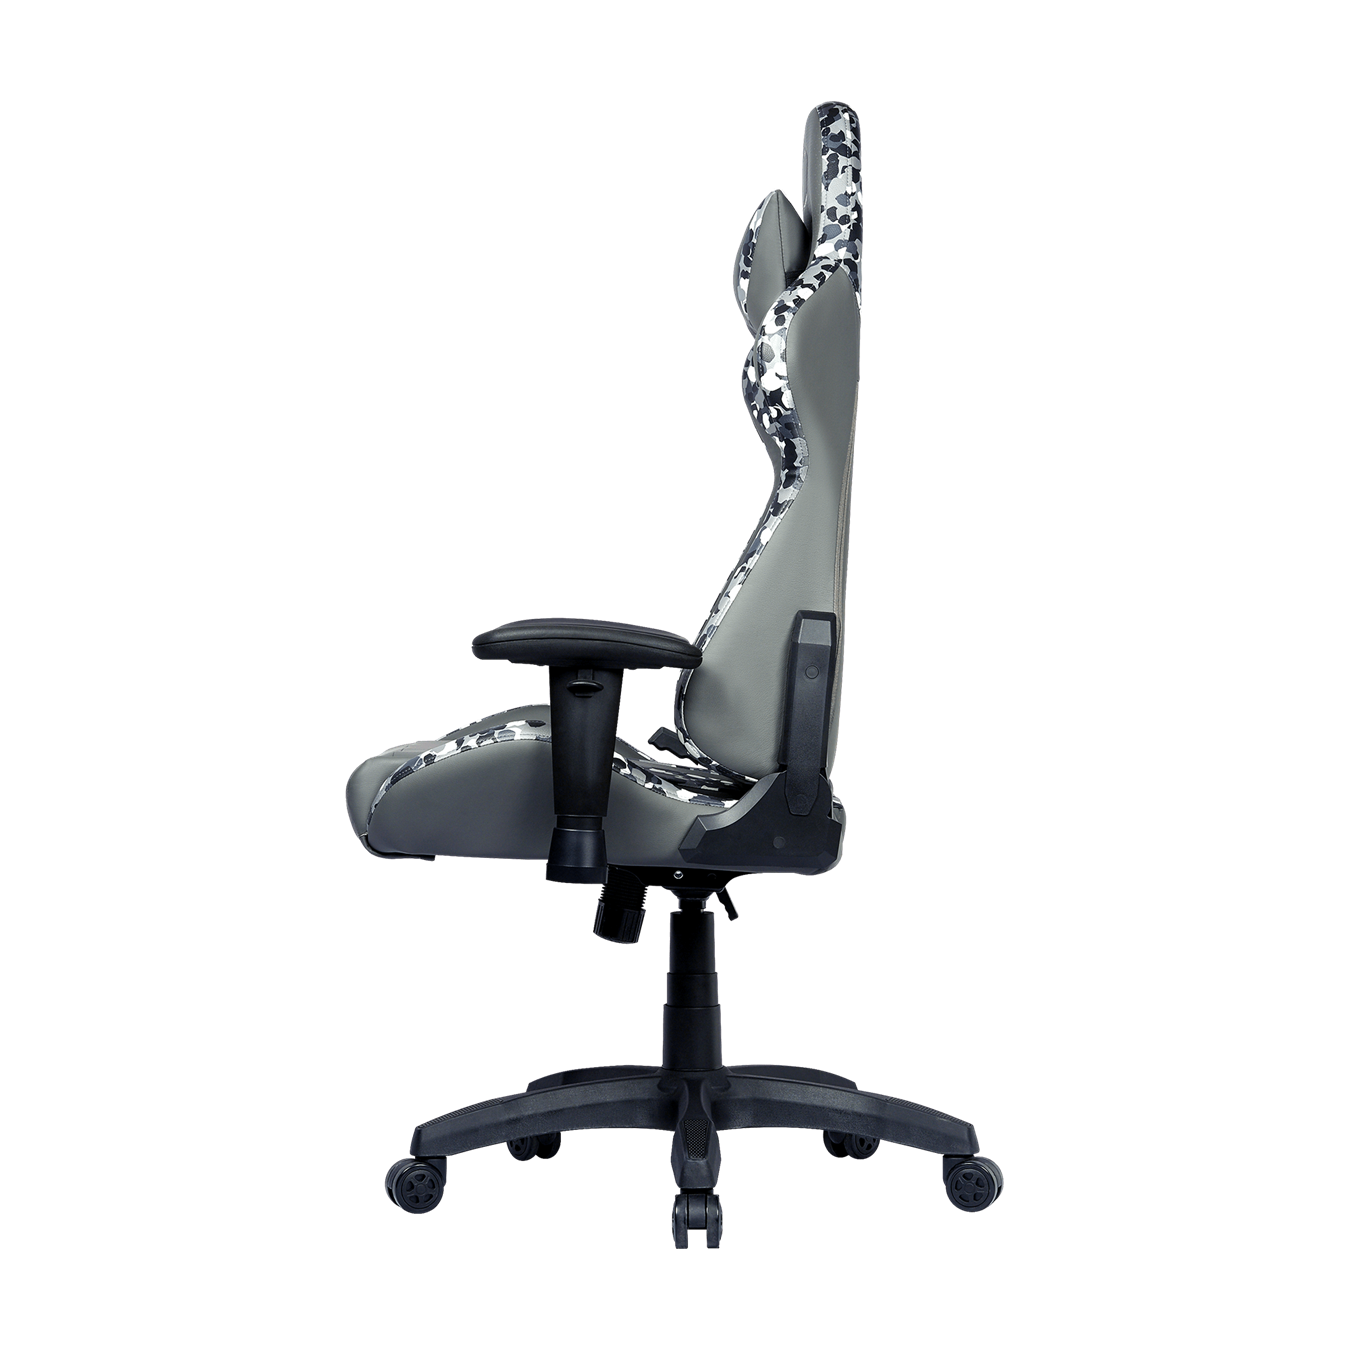 CoolerMaster CALIBER R1S CAMO Gaming Chair-Gaming Chair-Cooler Master-computerspace